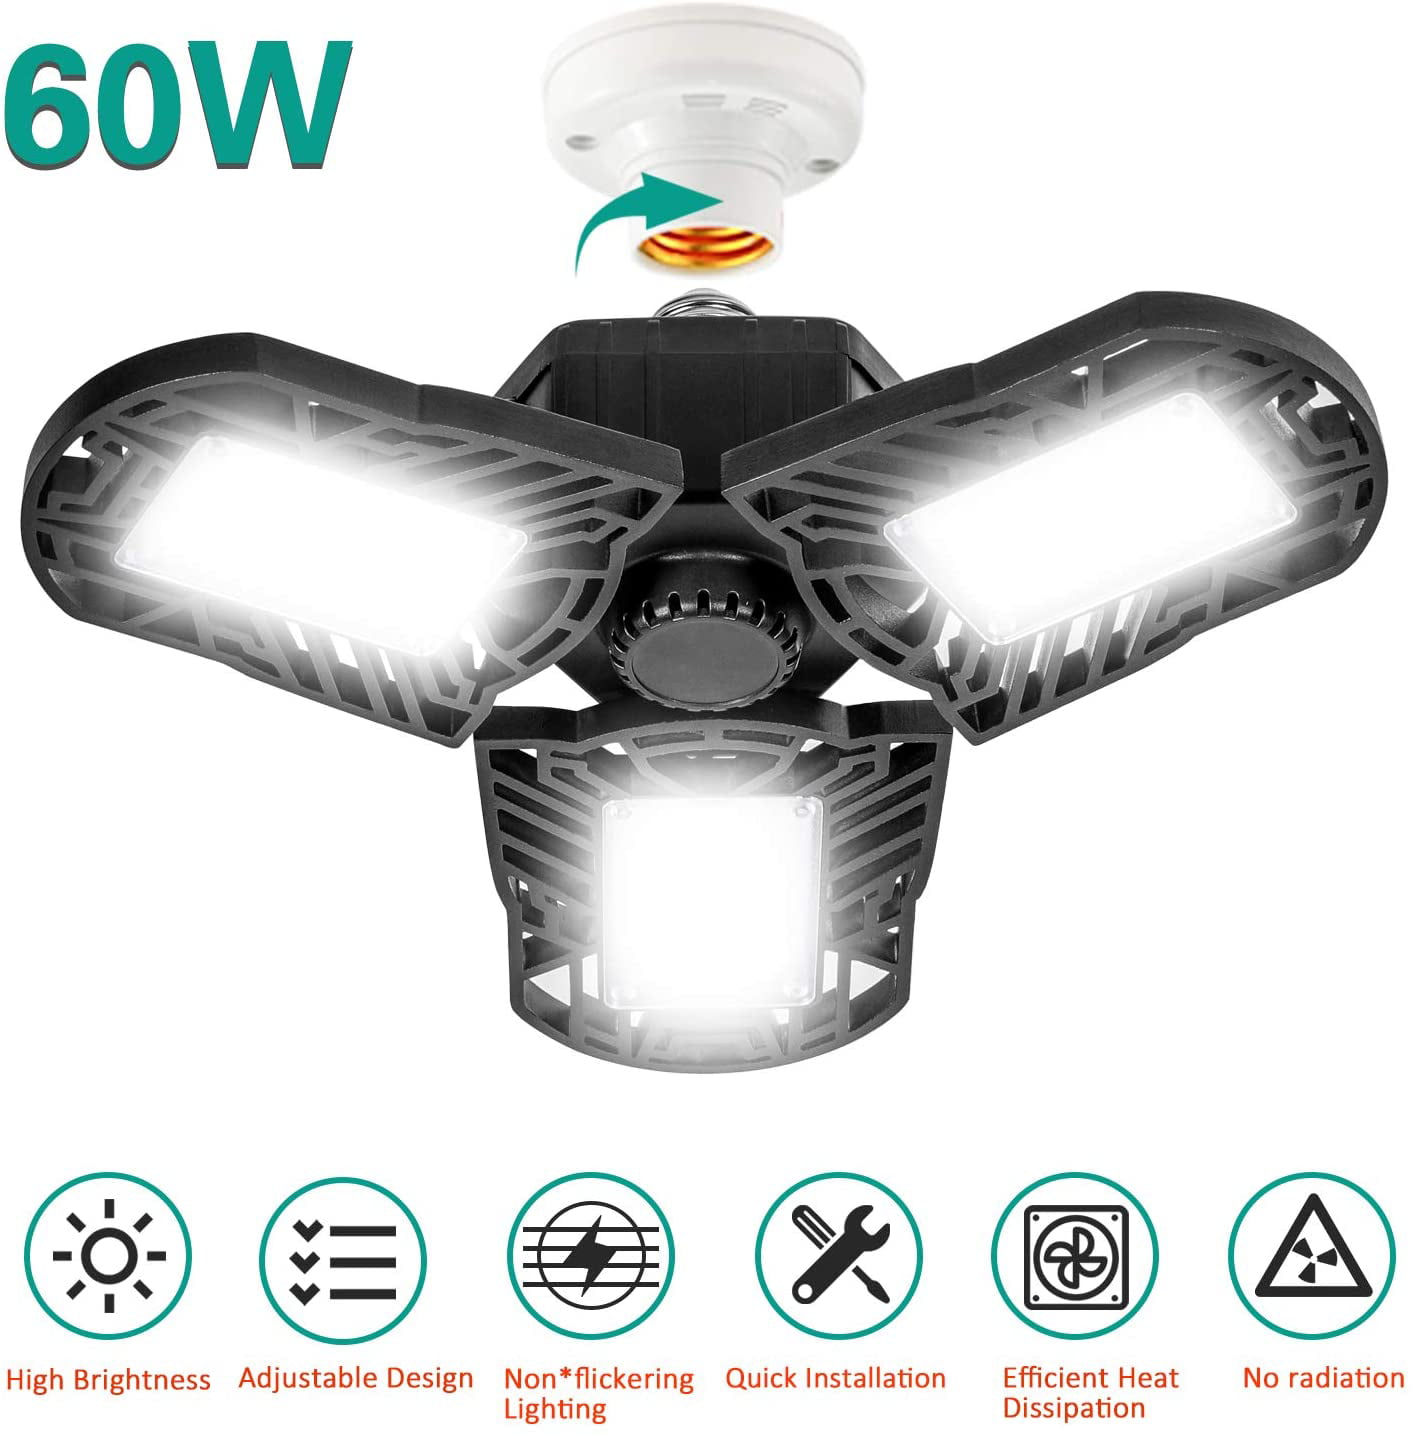 60W 8000LM Deformable LED Garage Lights Bright Shop Ceiling Light Fixture Bulbs 